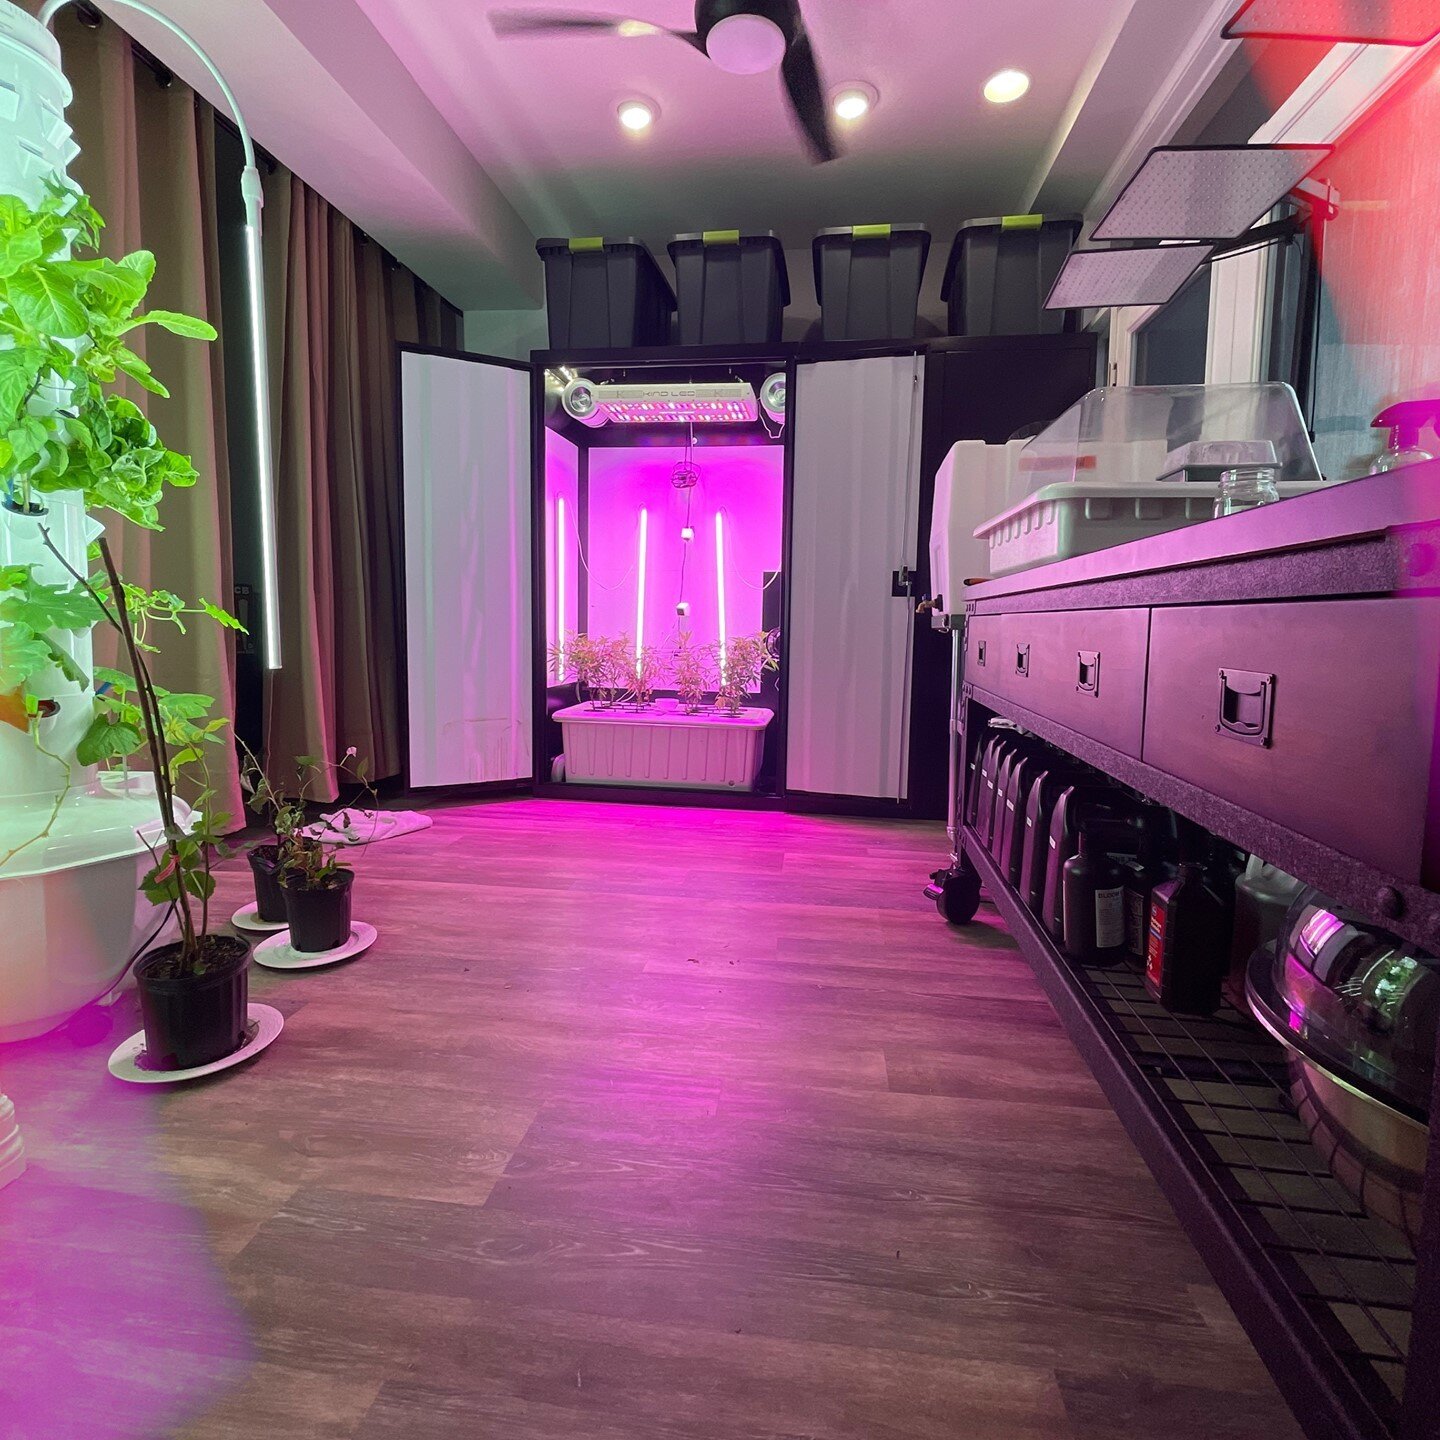 This Penthouse setup is giving us some SERIOUS #vibes 🤩 
Click the link in our bio to check out this unit &amp; save this post for your grow setup inspiration! 

#mondaymotivation #inspo #aesthetic #itsavibe⚡ #growyourown #growathome #cannabis #cann